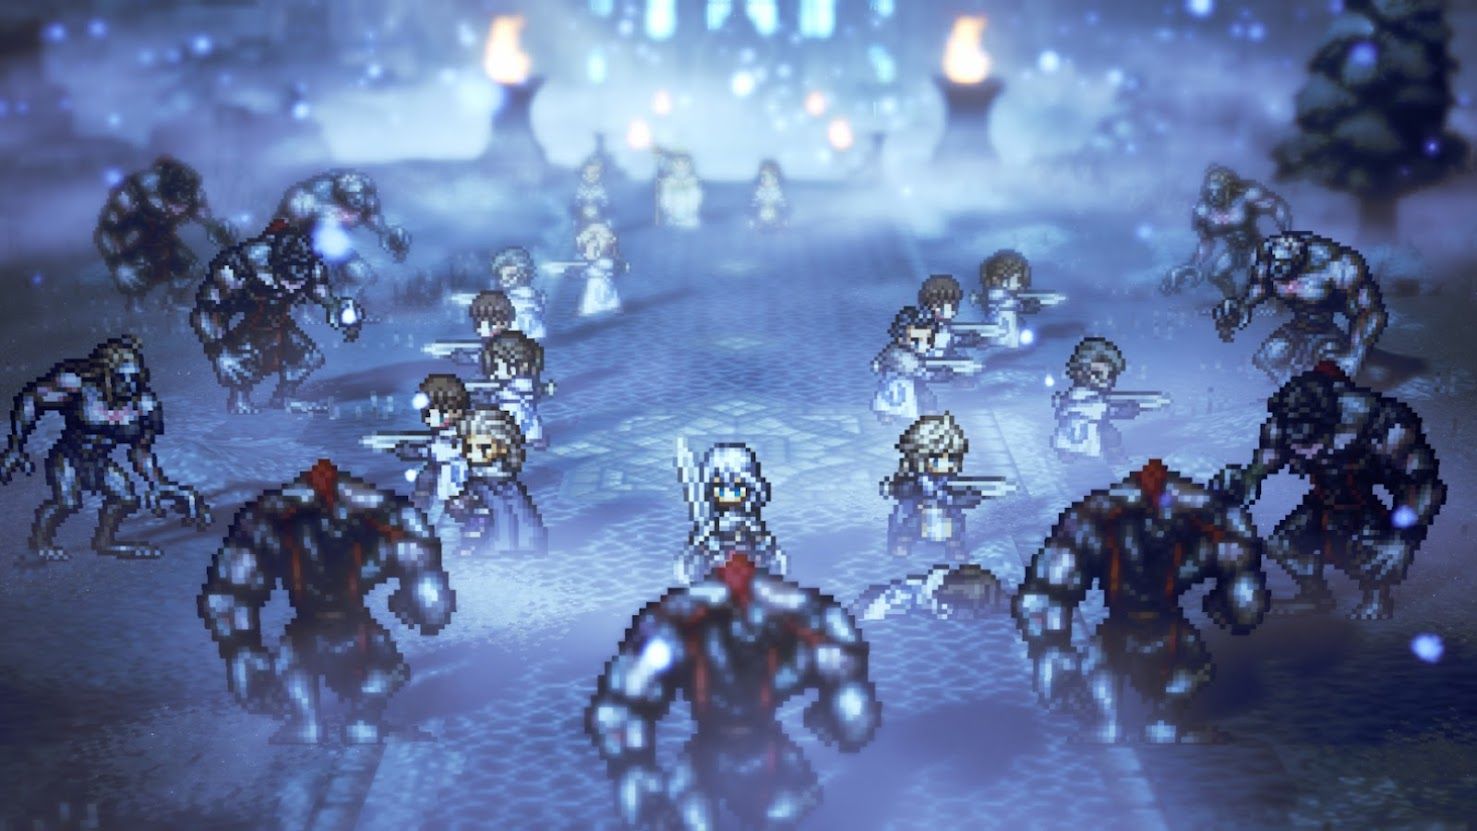 OCTOPATH TRAVELER: Champions of the Continent Gameplay Android